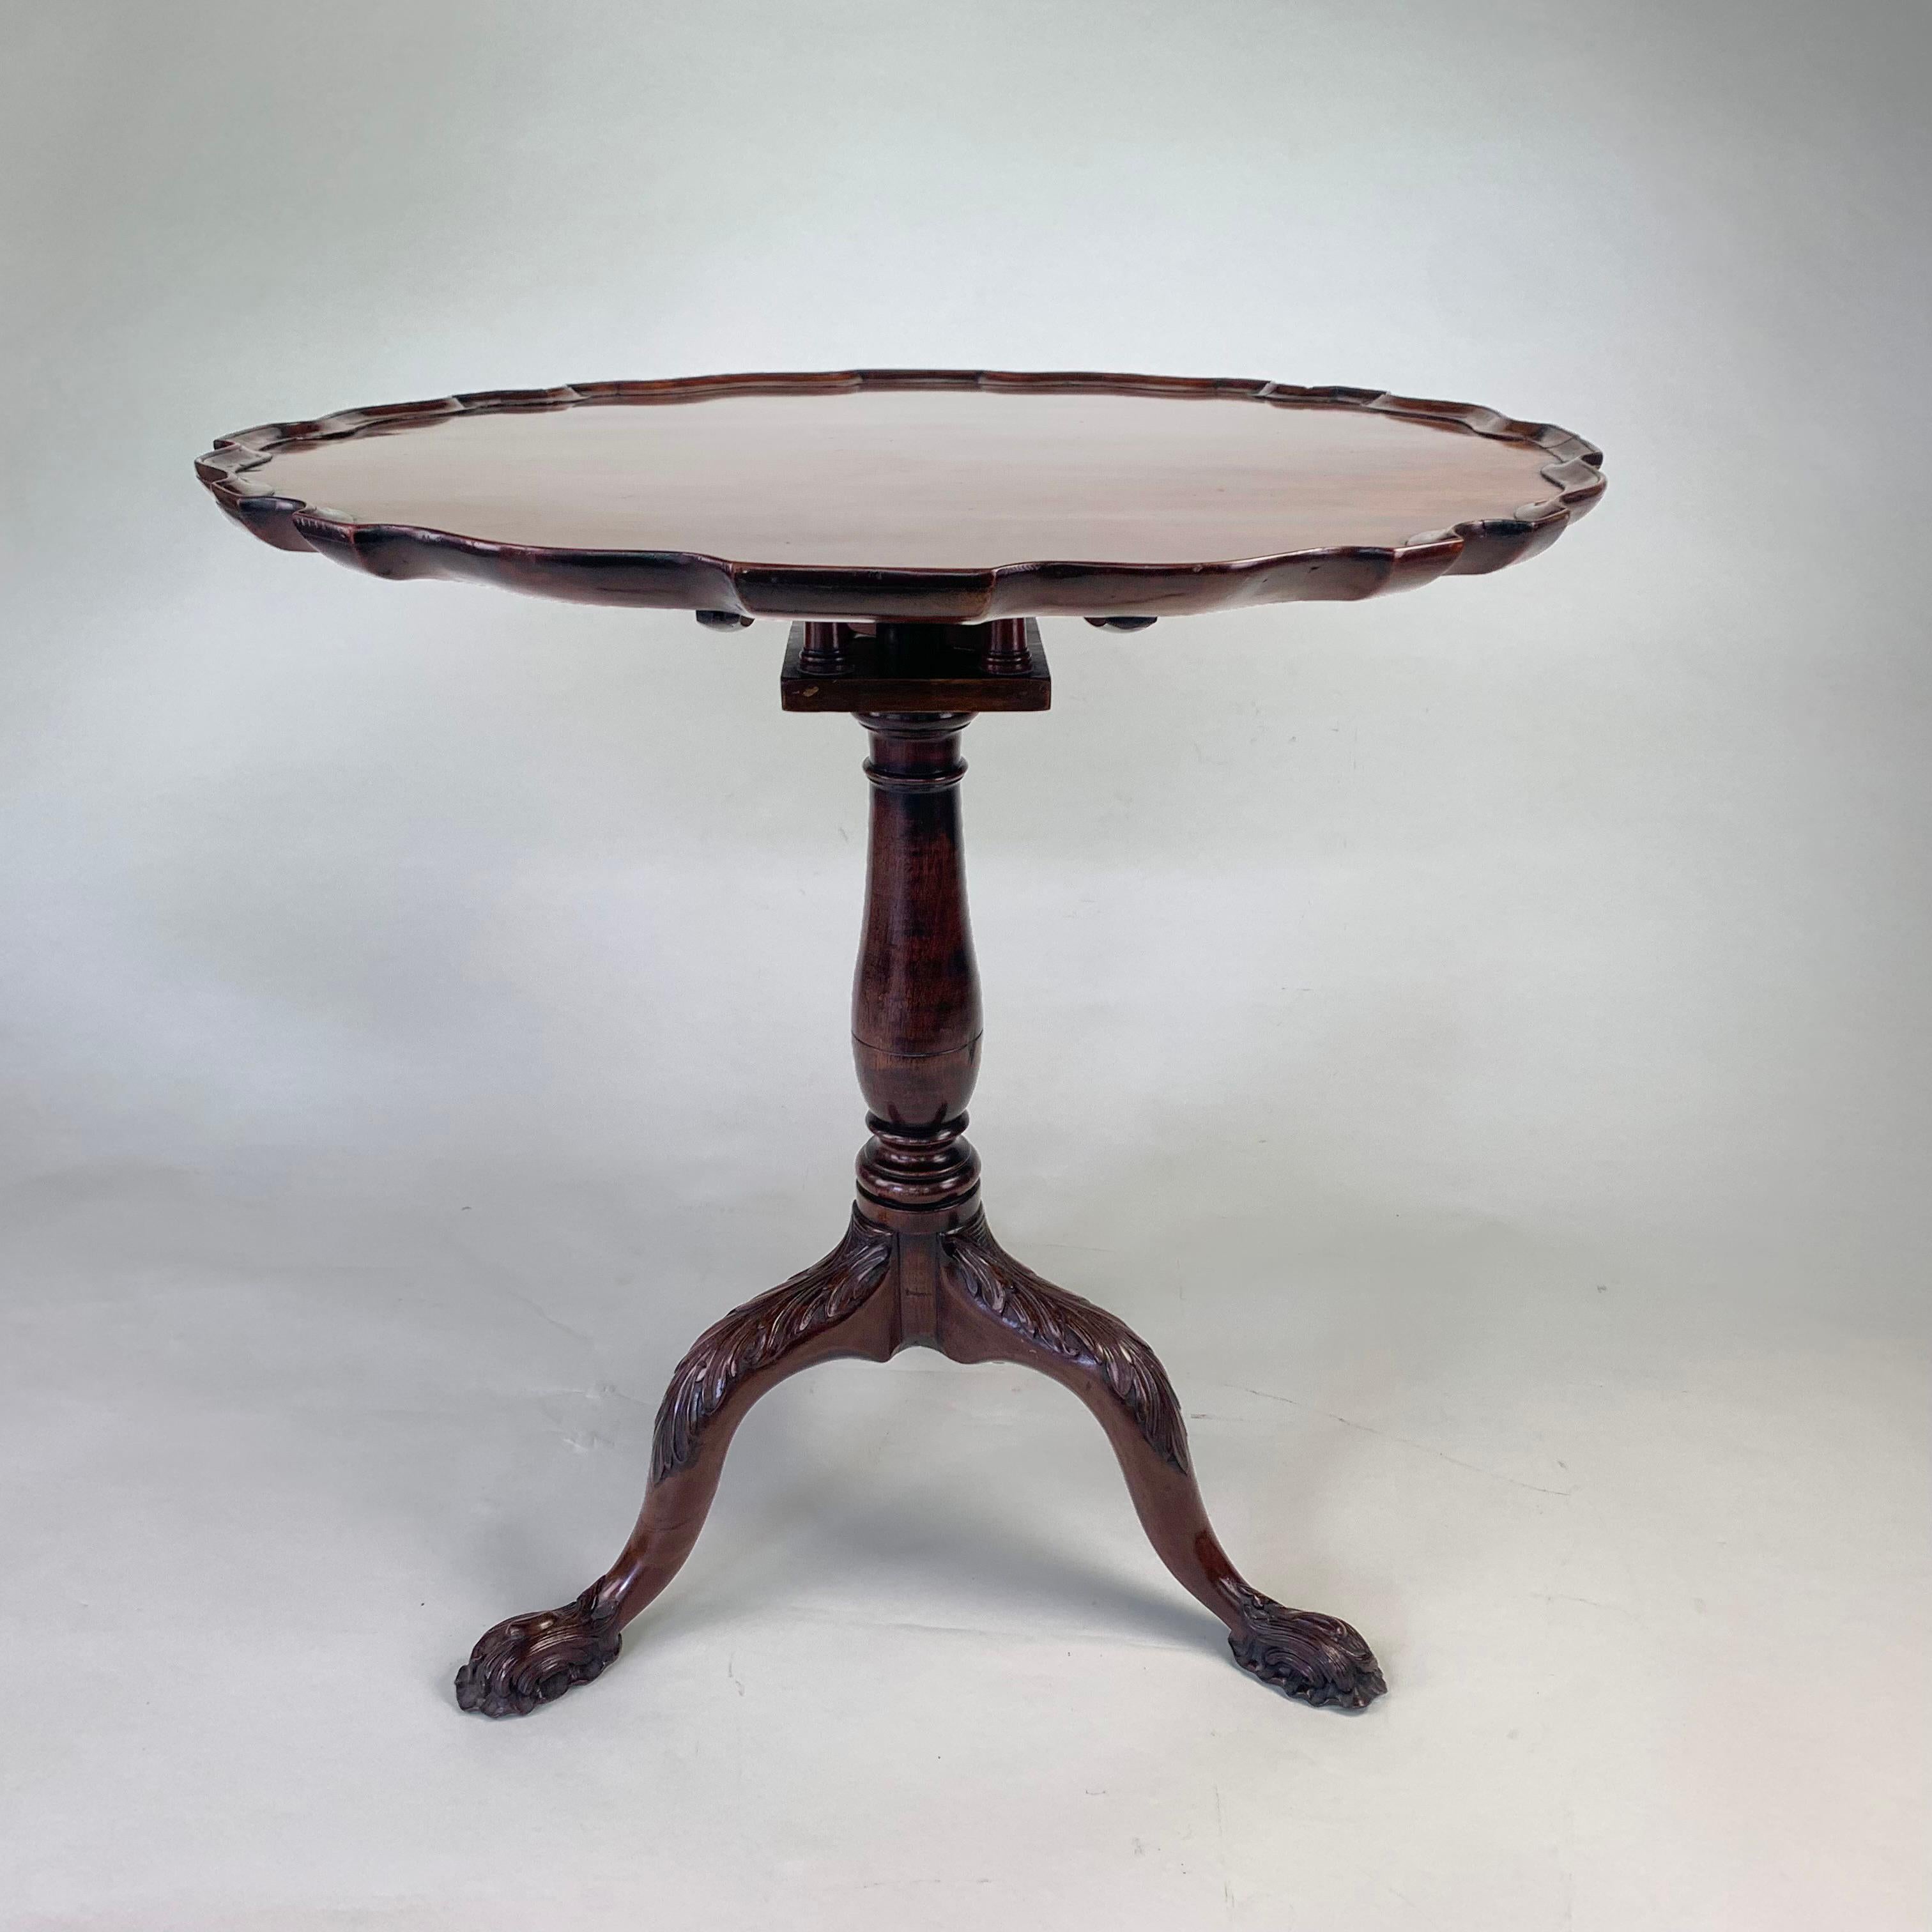 A delightful mid Georgian mahogany tripod table with superb carved decoration throughout. The tilting piecrust top supported on a revolving 'birdcage' stem and profusely carved tripod base with acanthus knees and superb feet.